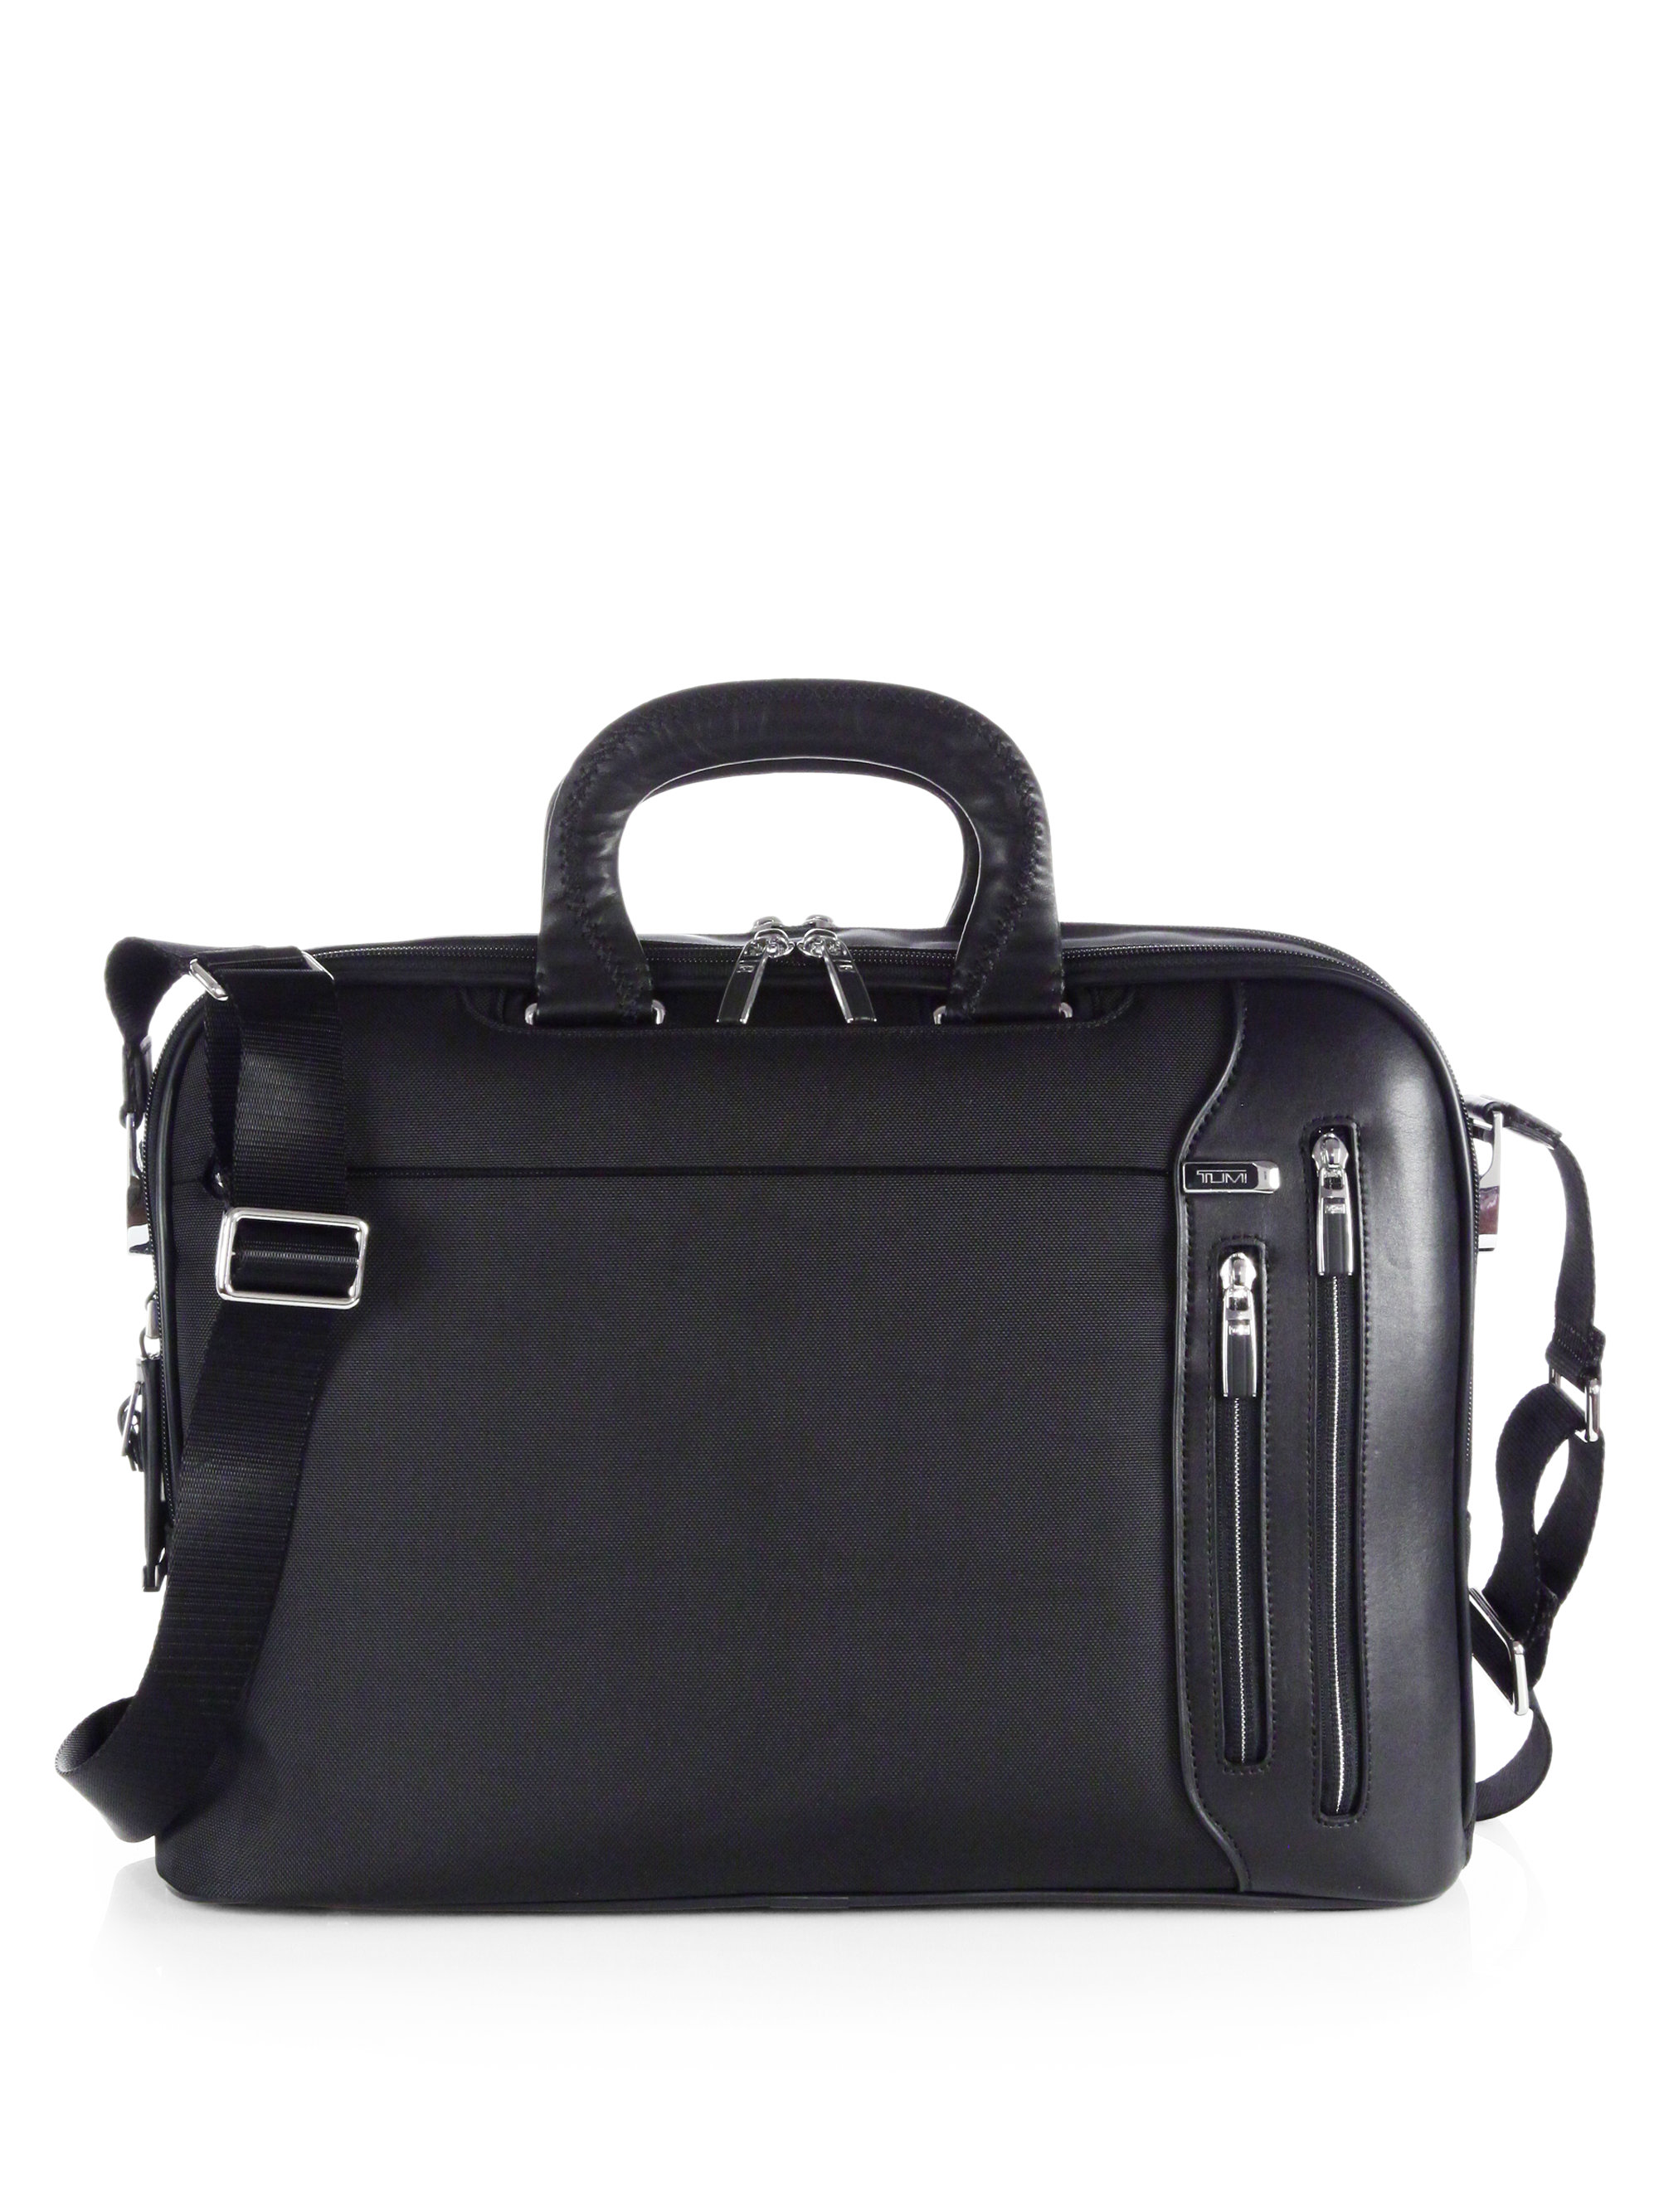 Best Luxury Briefcases For Men | IQS Executive